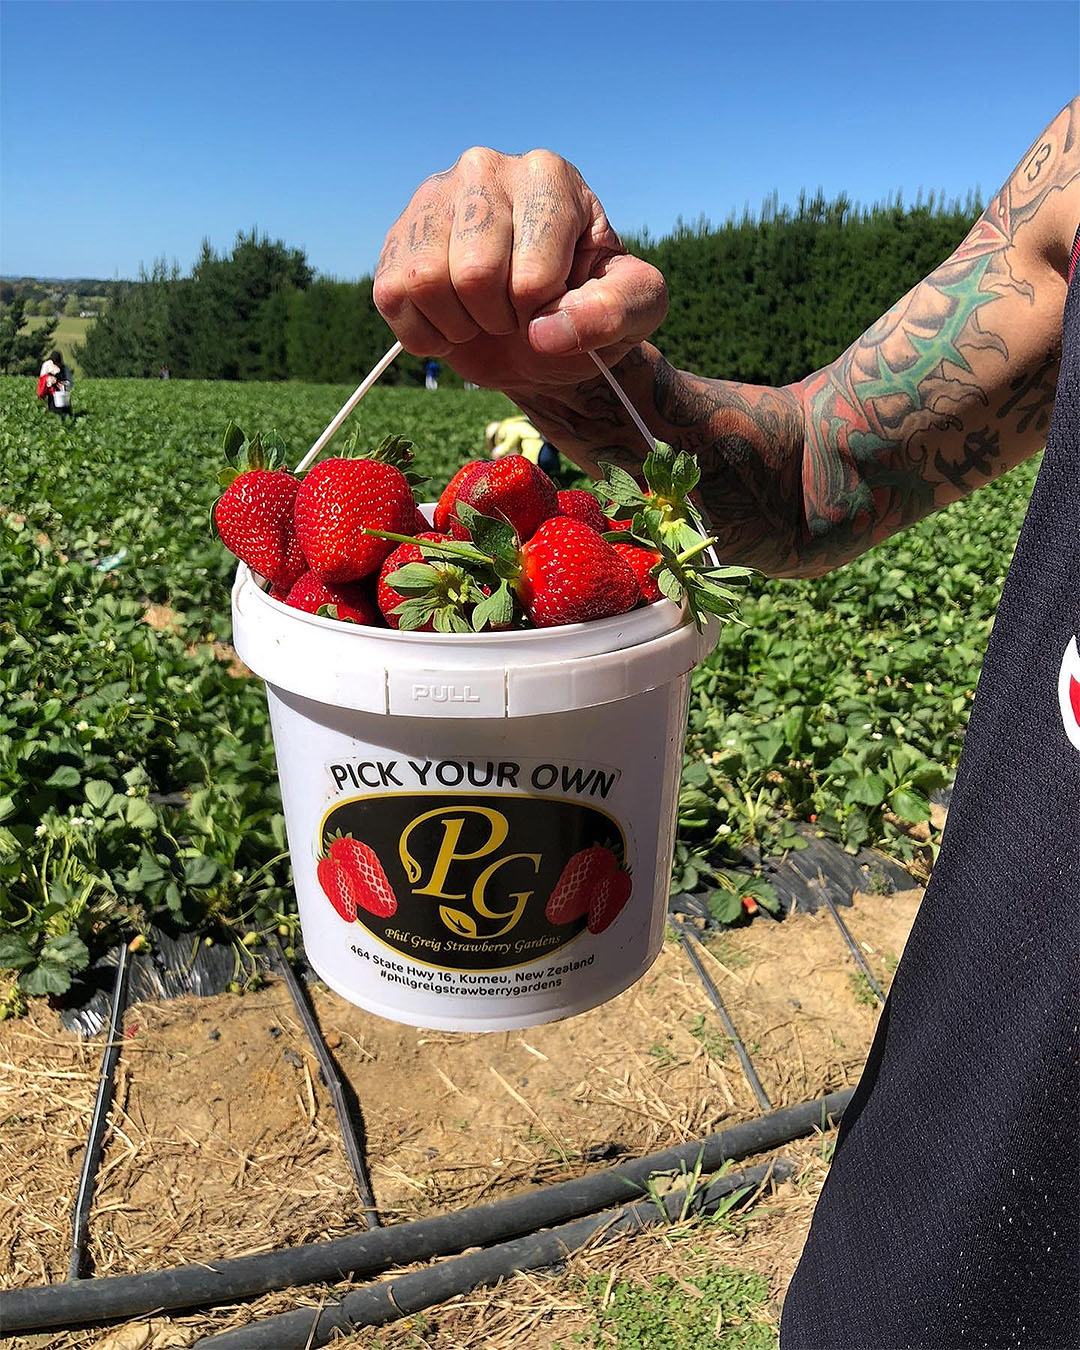 A man holds a huge punnet of strawberries at Phil Greig.